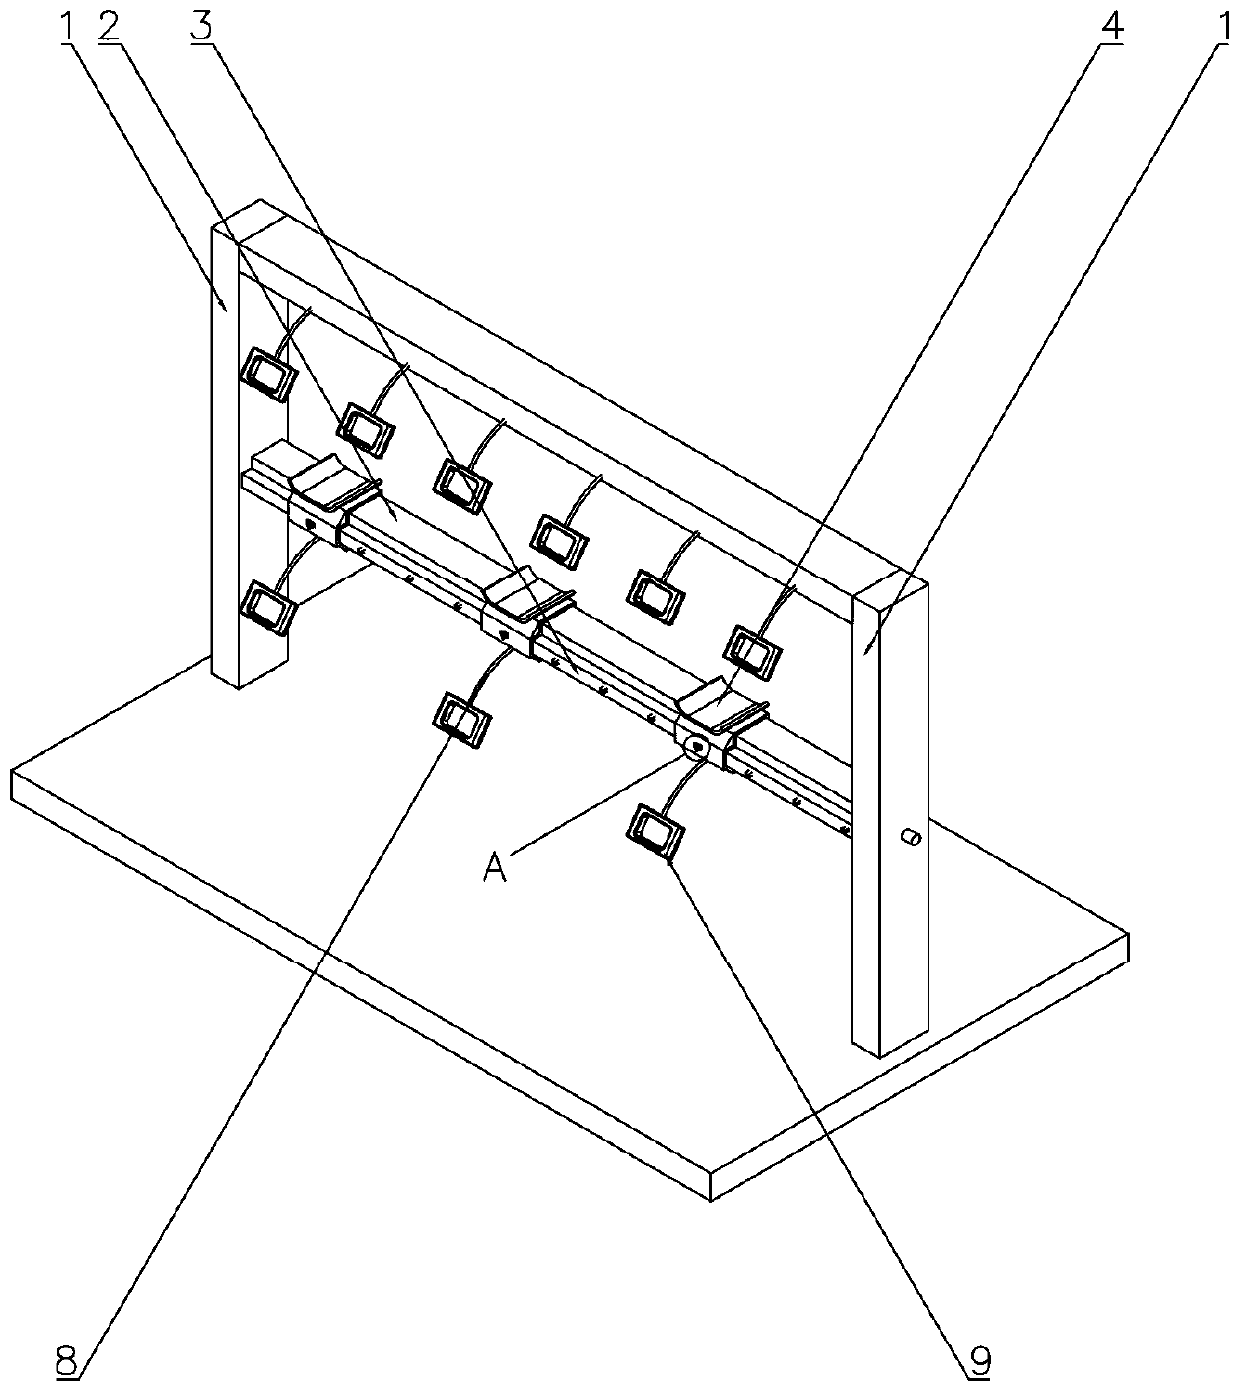 Leg pressing device with high safety